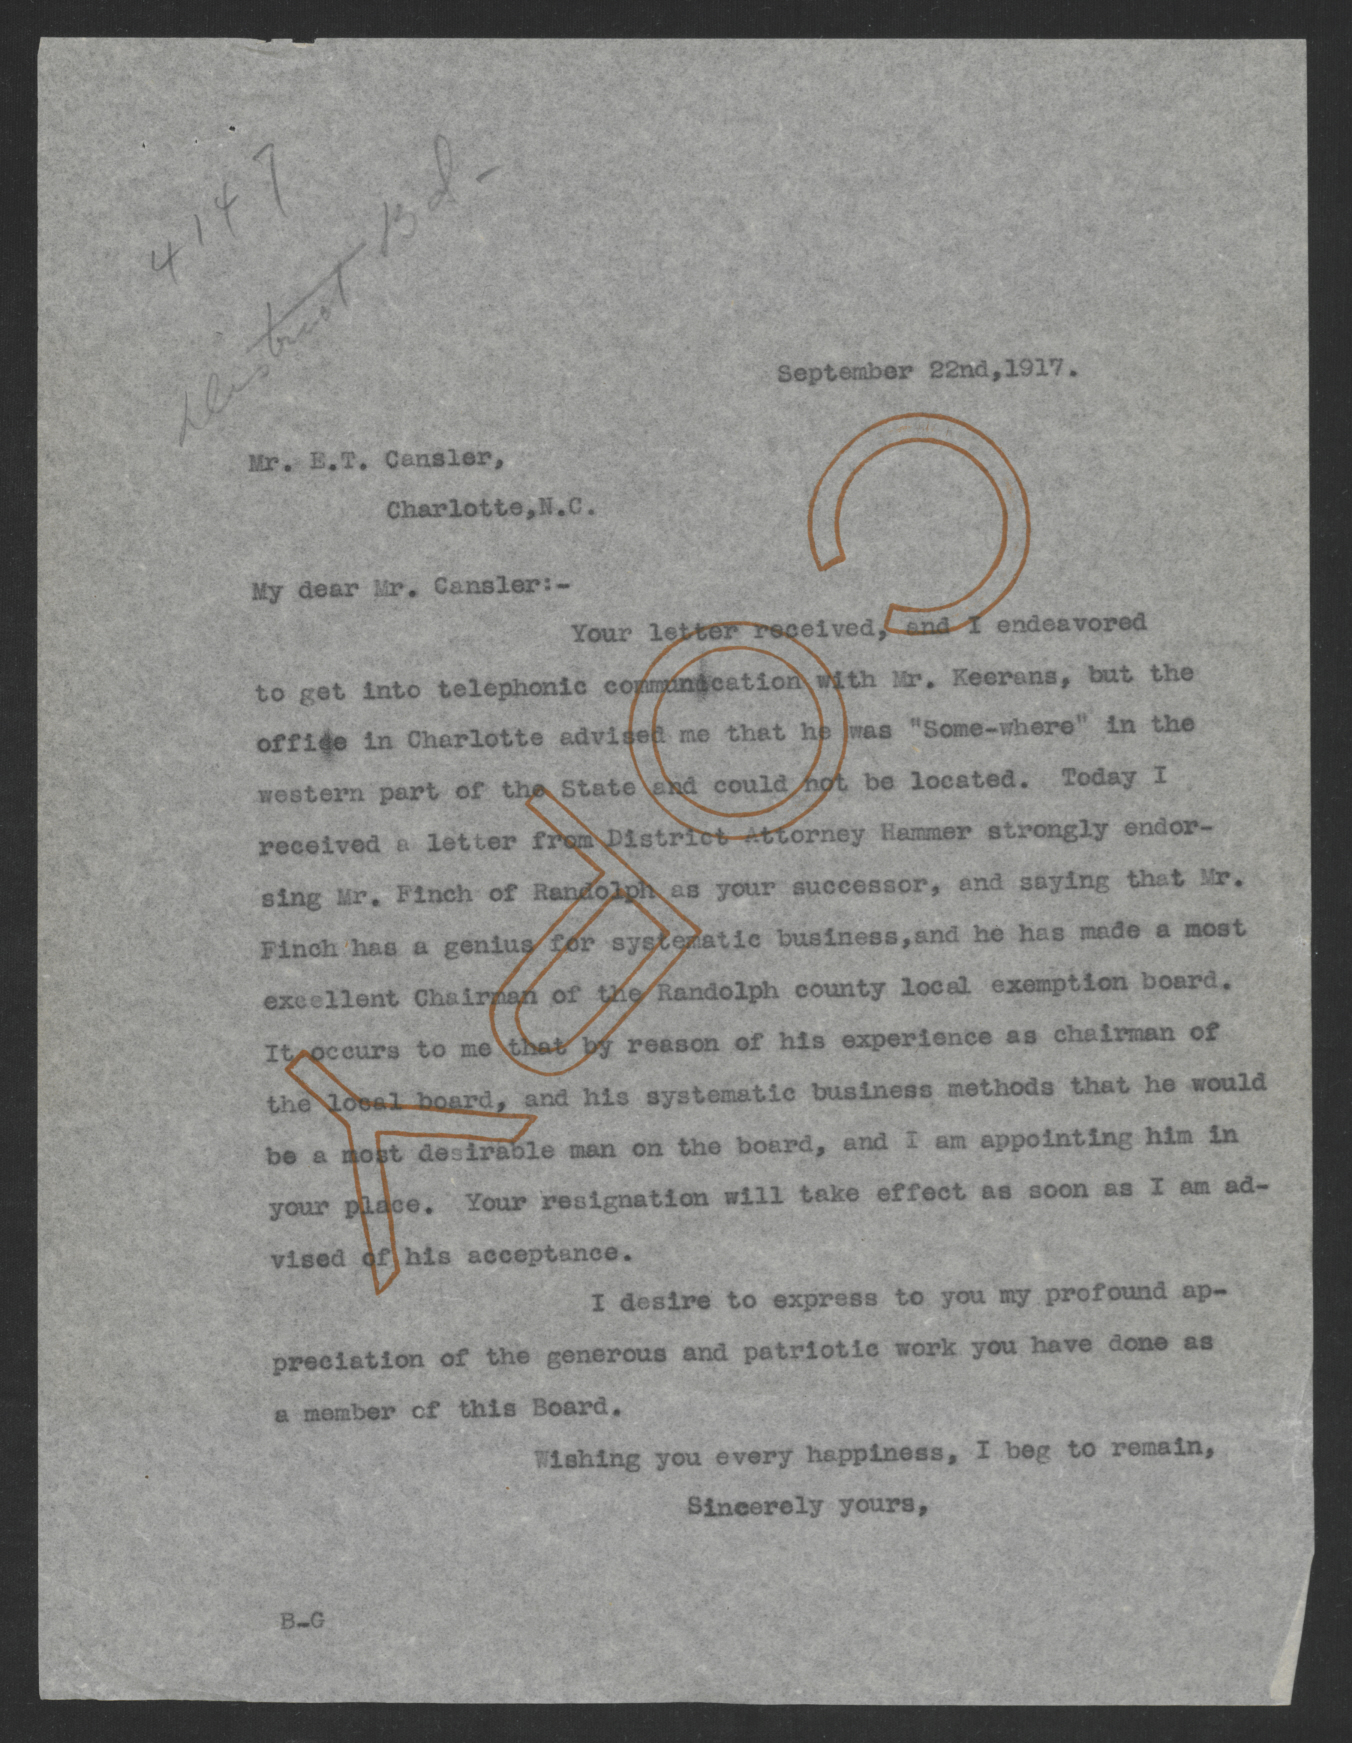 Letter from Thomas W. Bickett to Edwin T. Cansler, September 22, 1917